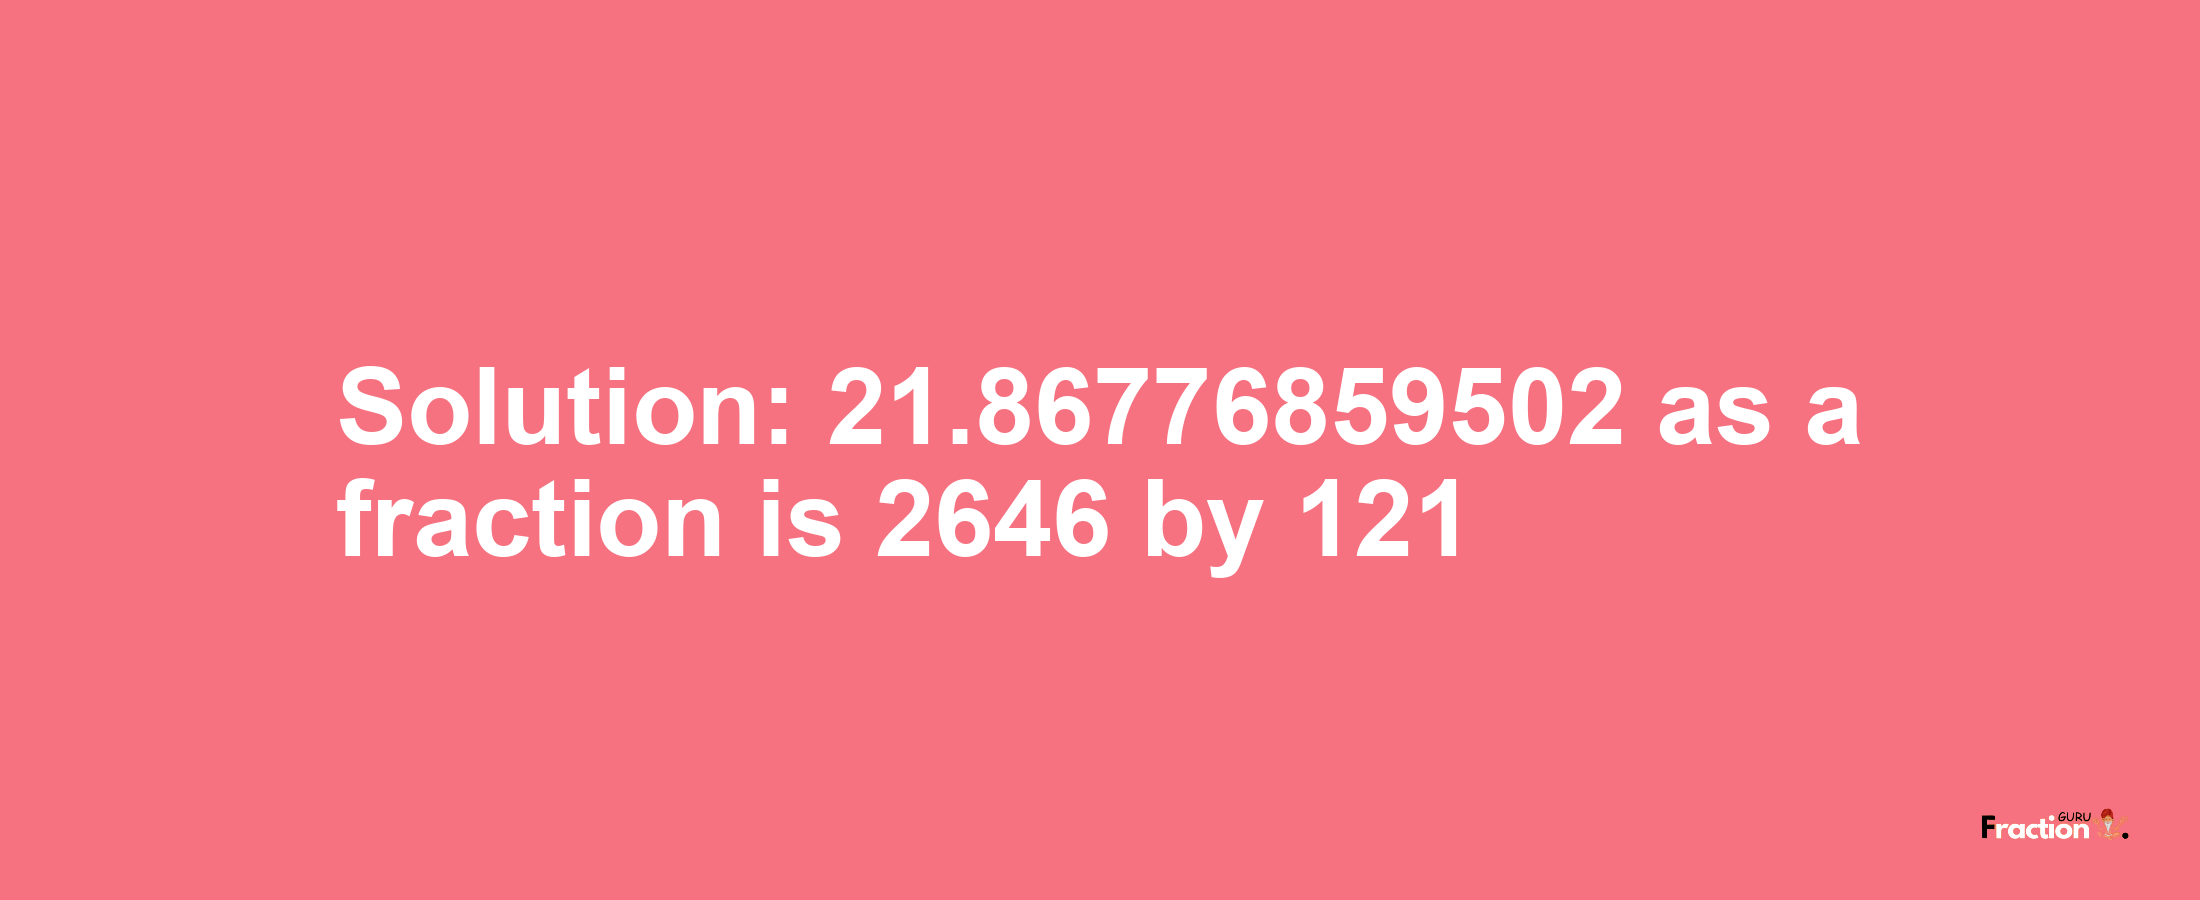 Solution:21.86776859502 as a fraction is 2646/121